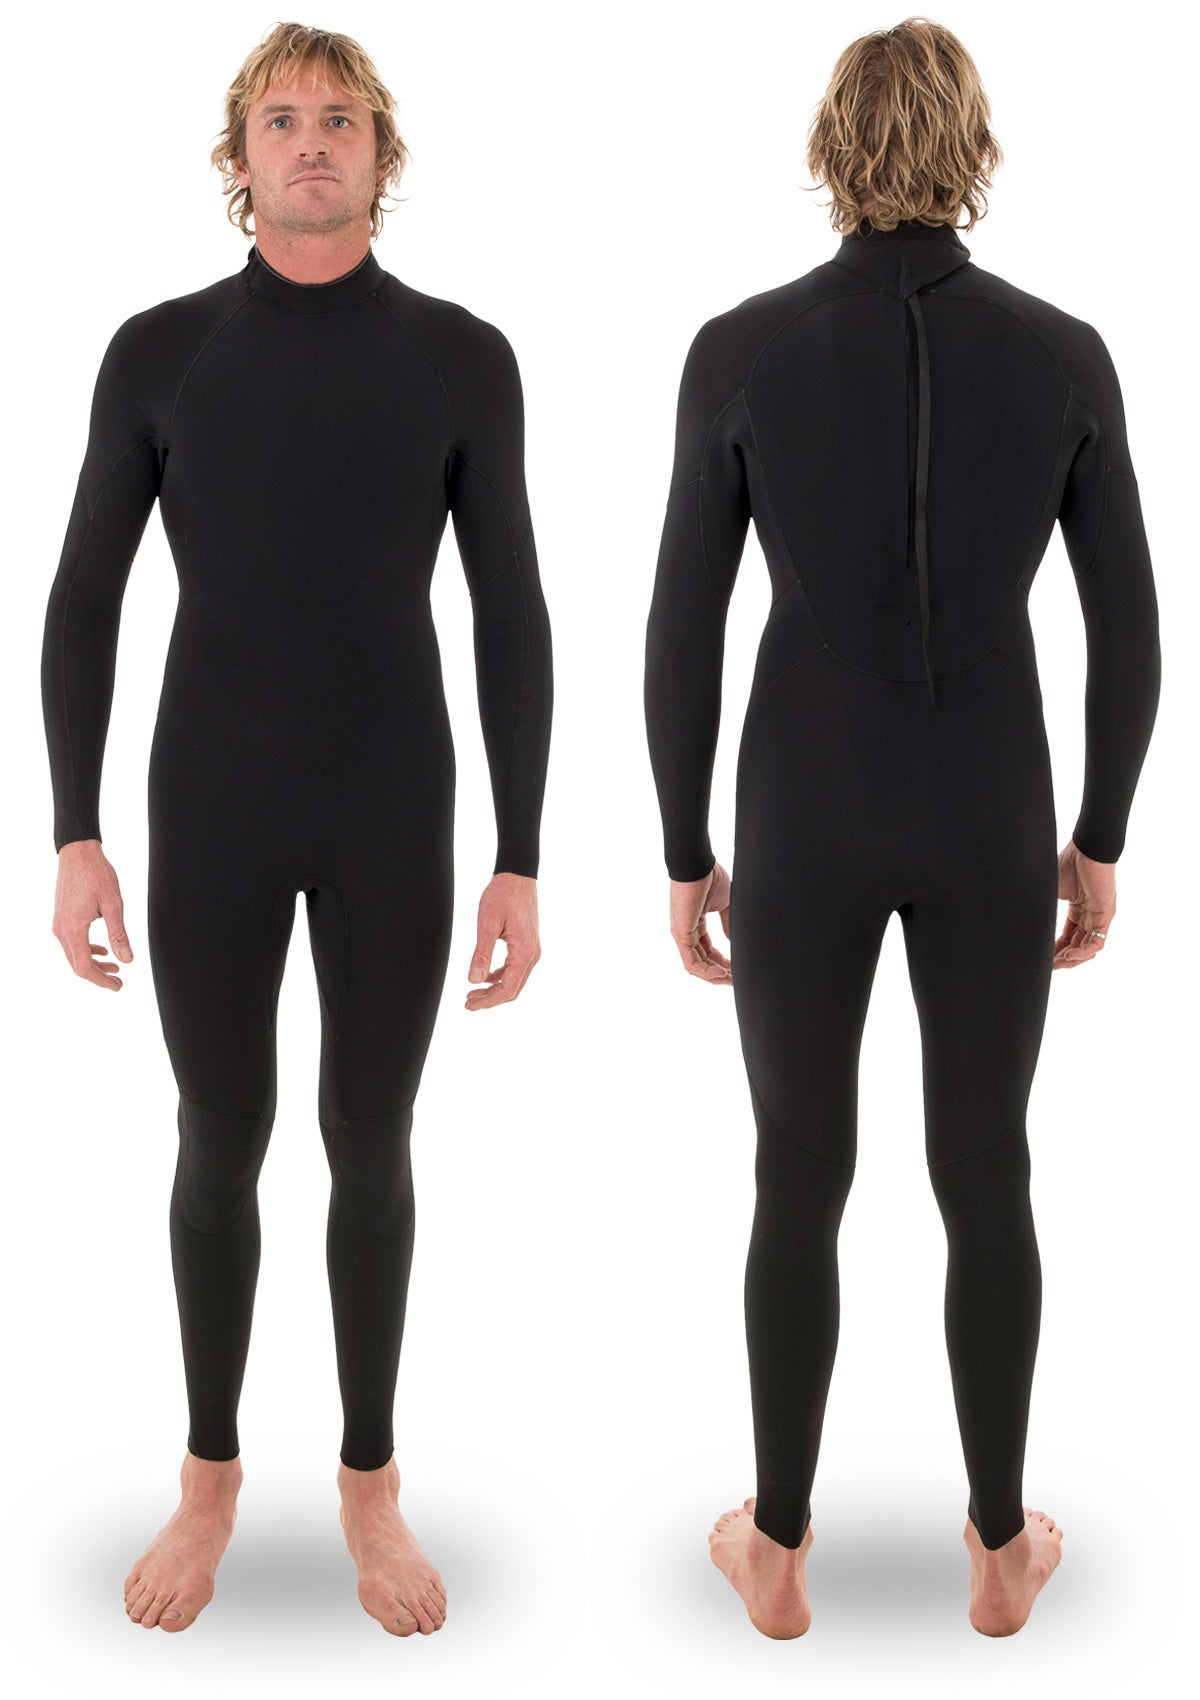 needessentials 4/3 back zip thermal wetsuit laurie towner surfing winter black non branded